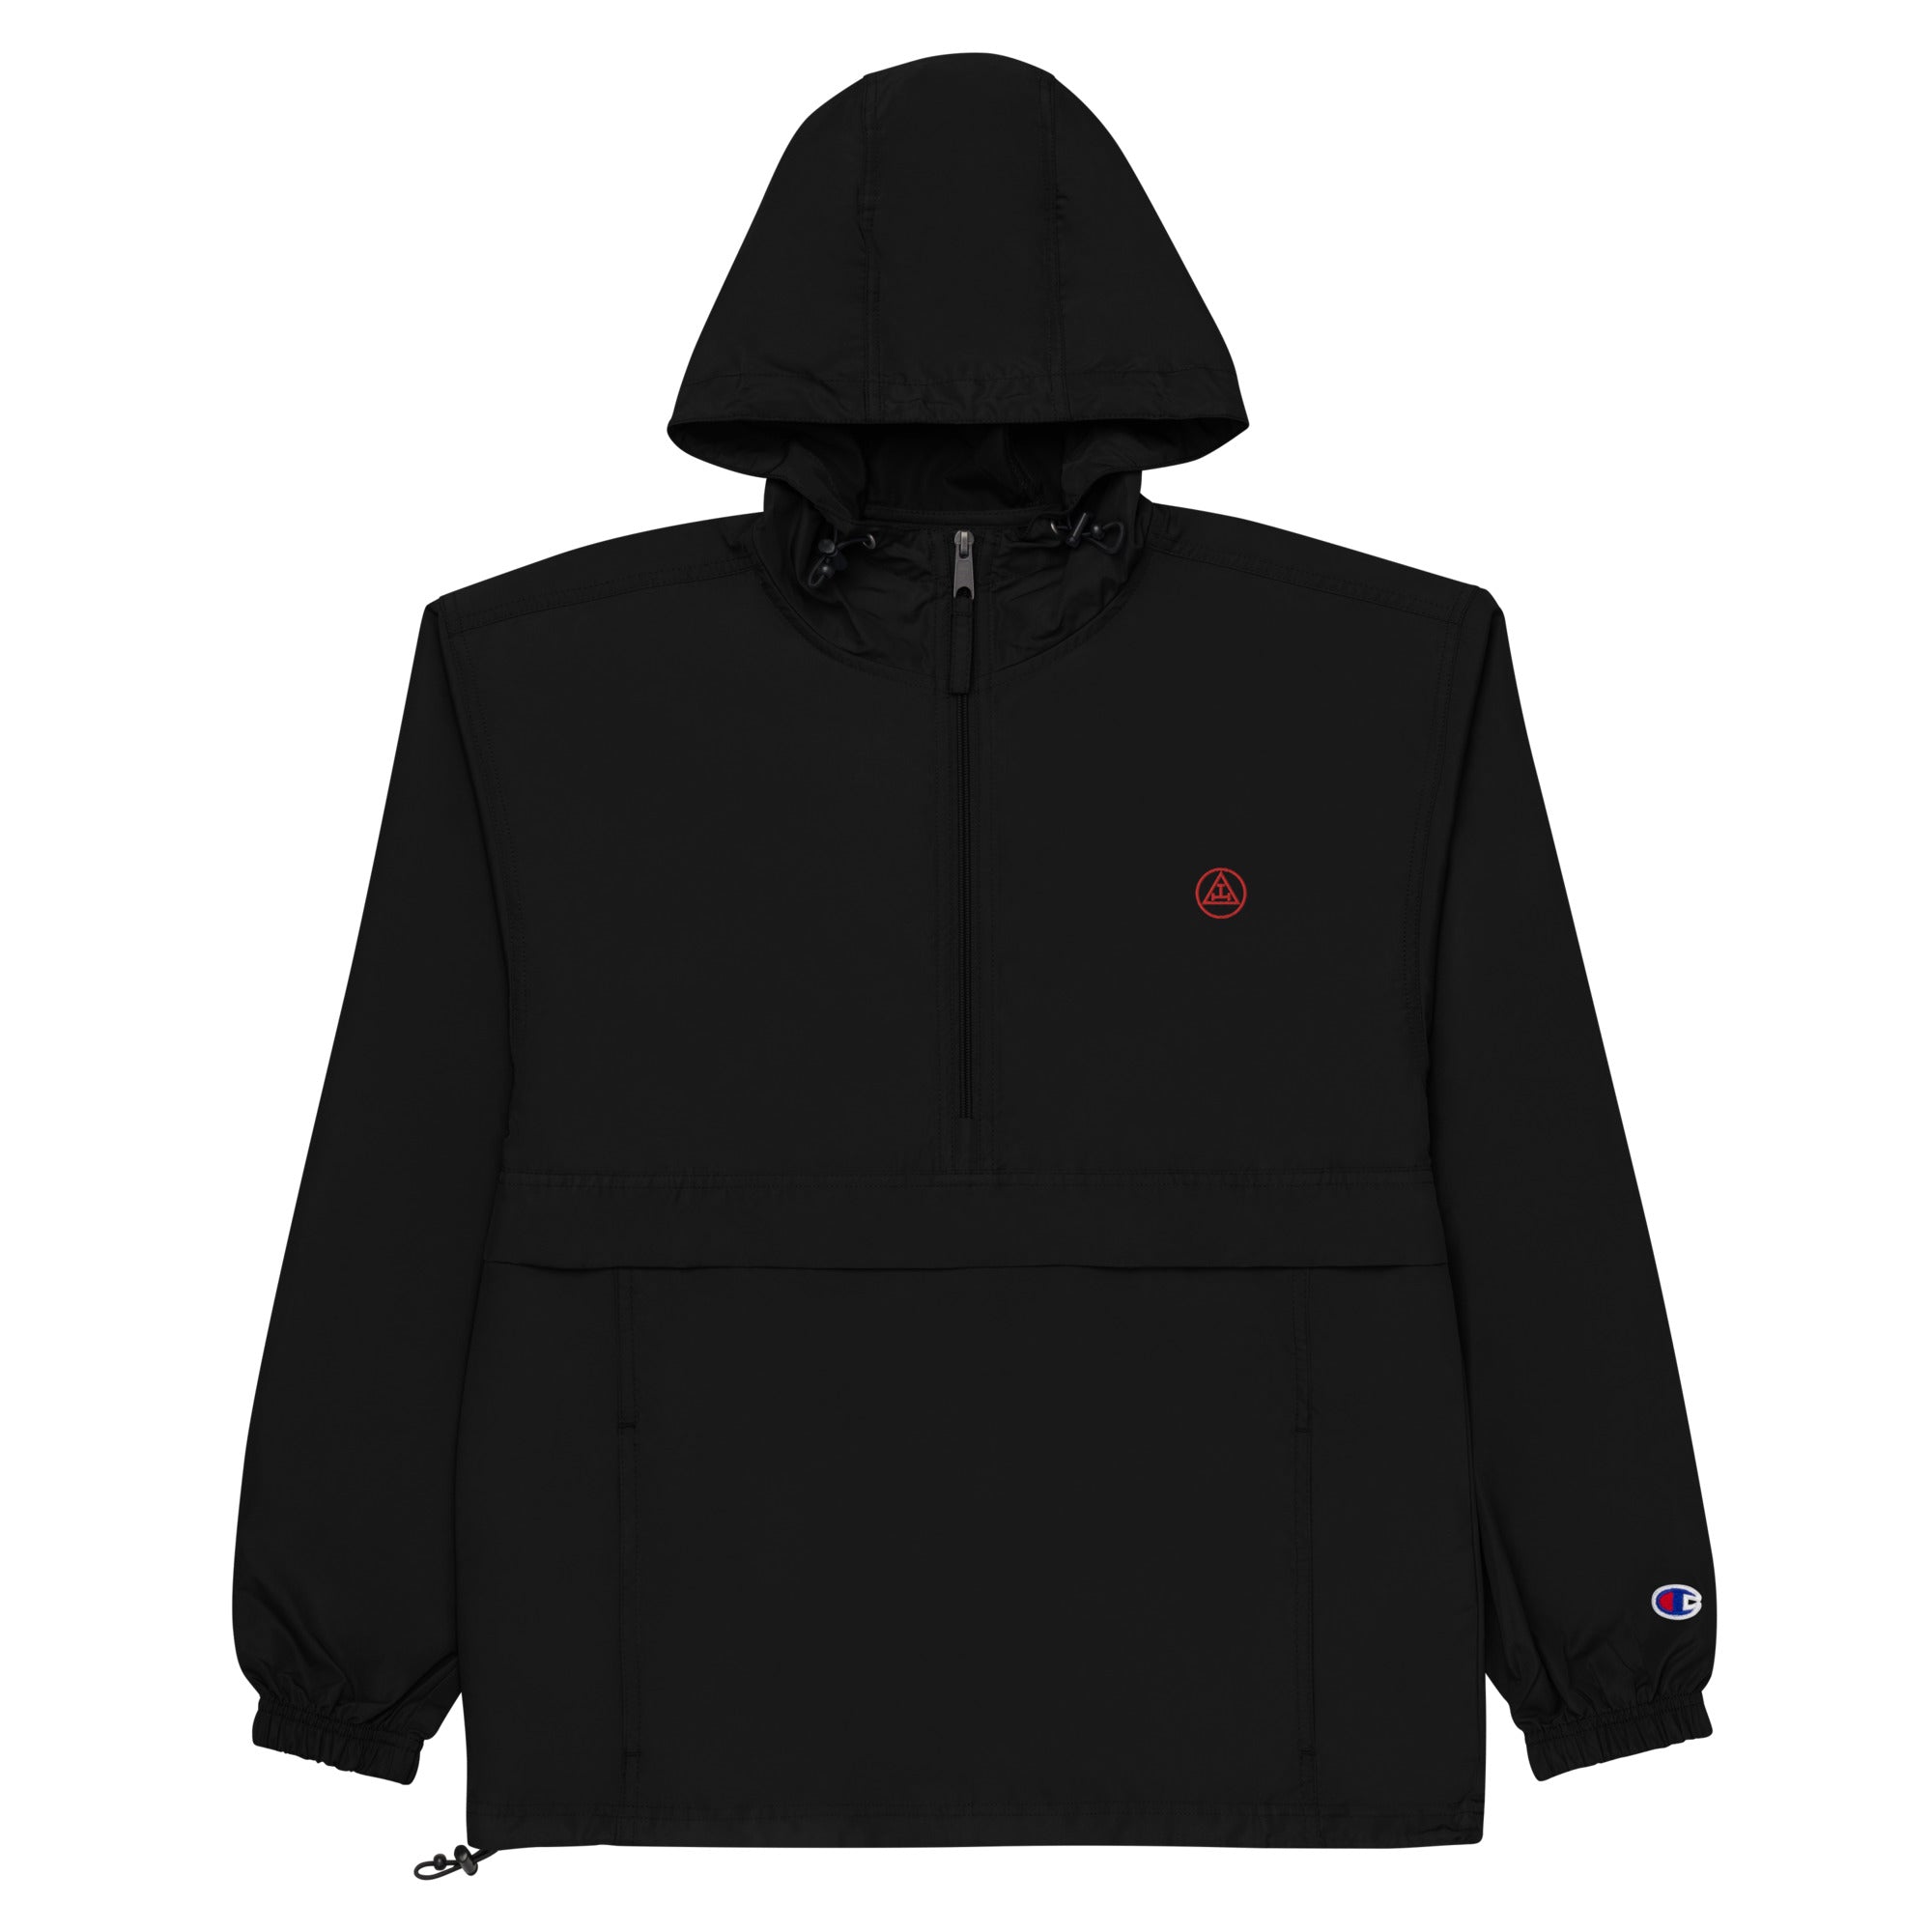 Royal Arch Logo Embroidered Champion Packable Windbreaker